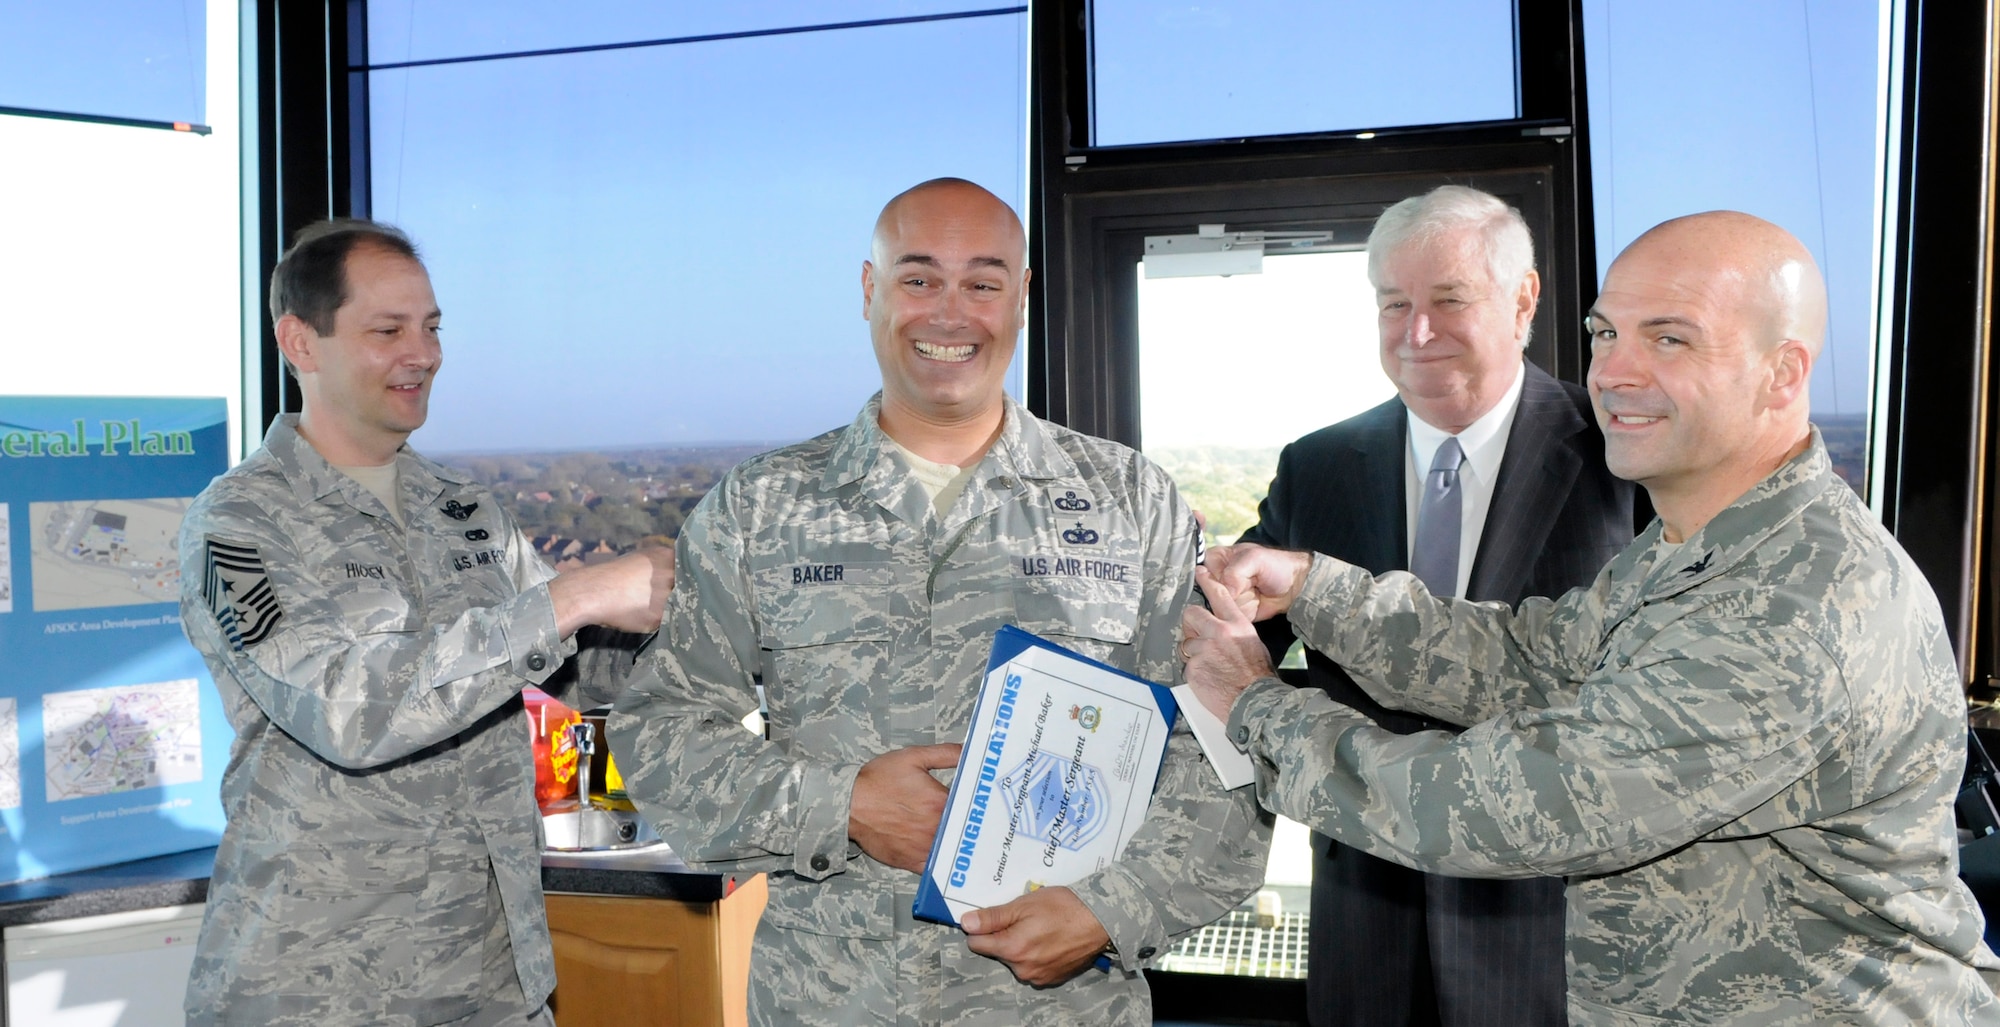 RAF MILDENHALL, England -- Louis Susman, U.S. ambassador to the U.K., Col. Chad Manske, 100th Air Refueling Wing commander and Chief Antonio Hickey, 100th Air Refueling Wing command chief, Promote Senior Master Sgt. Michael Baker, 100th Operations Support Squadron, to Chief Master Sergeant. Nov. 12.  Sergeant Baker was asked to give a last-minute briefing to Ambassador Susman but upon arrival was surprised to find out that he would receive his promotion certificate from the Ambassador. (U.S. Air Force photo/Staff Sgt. Christopher L. Ingersoll)